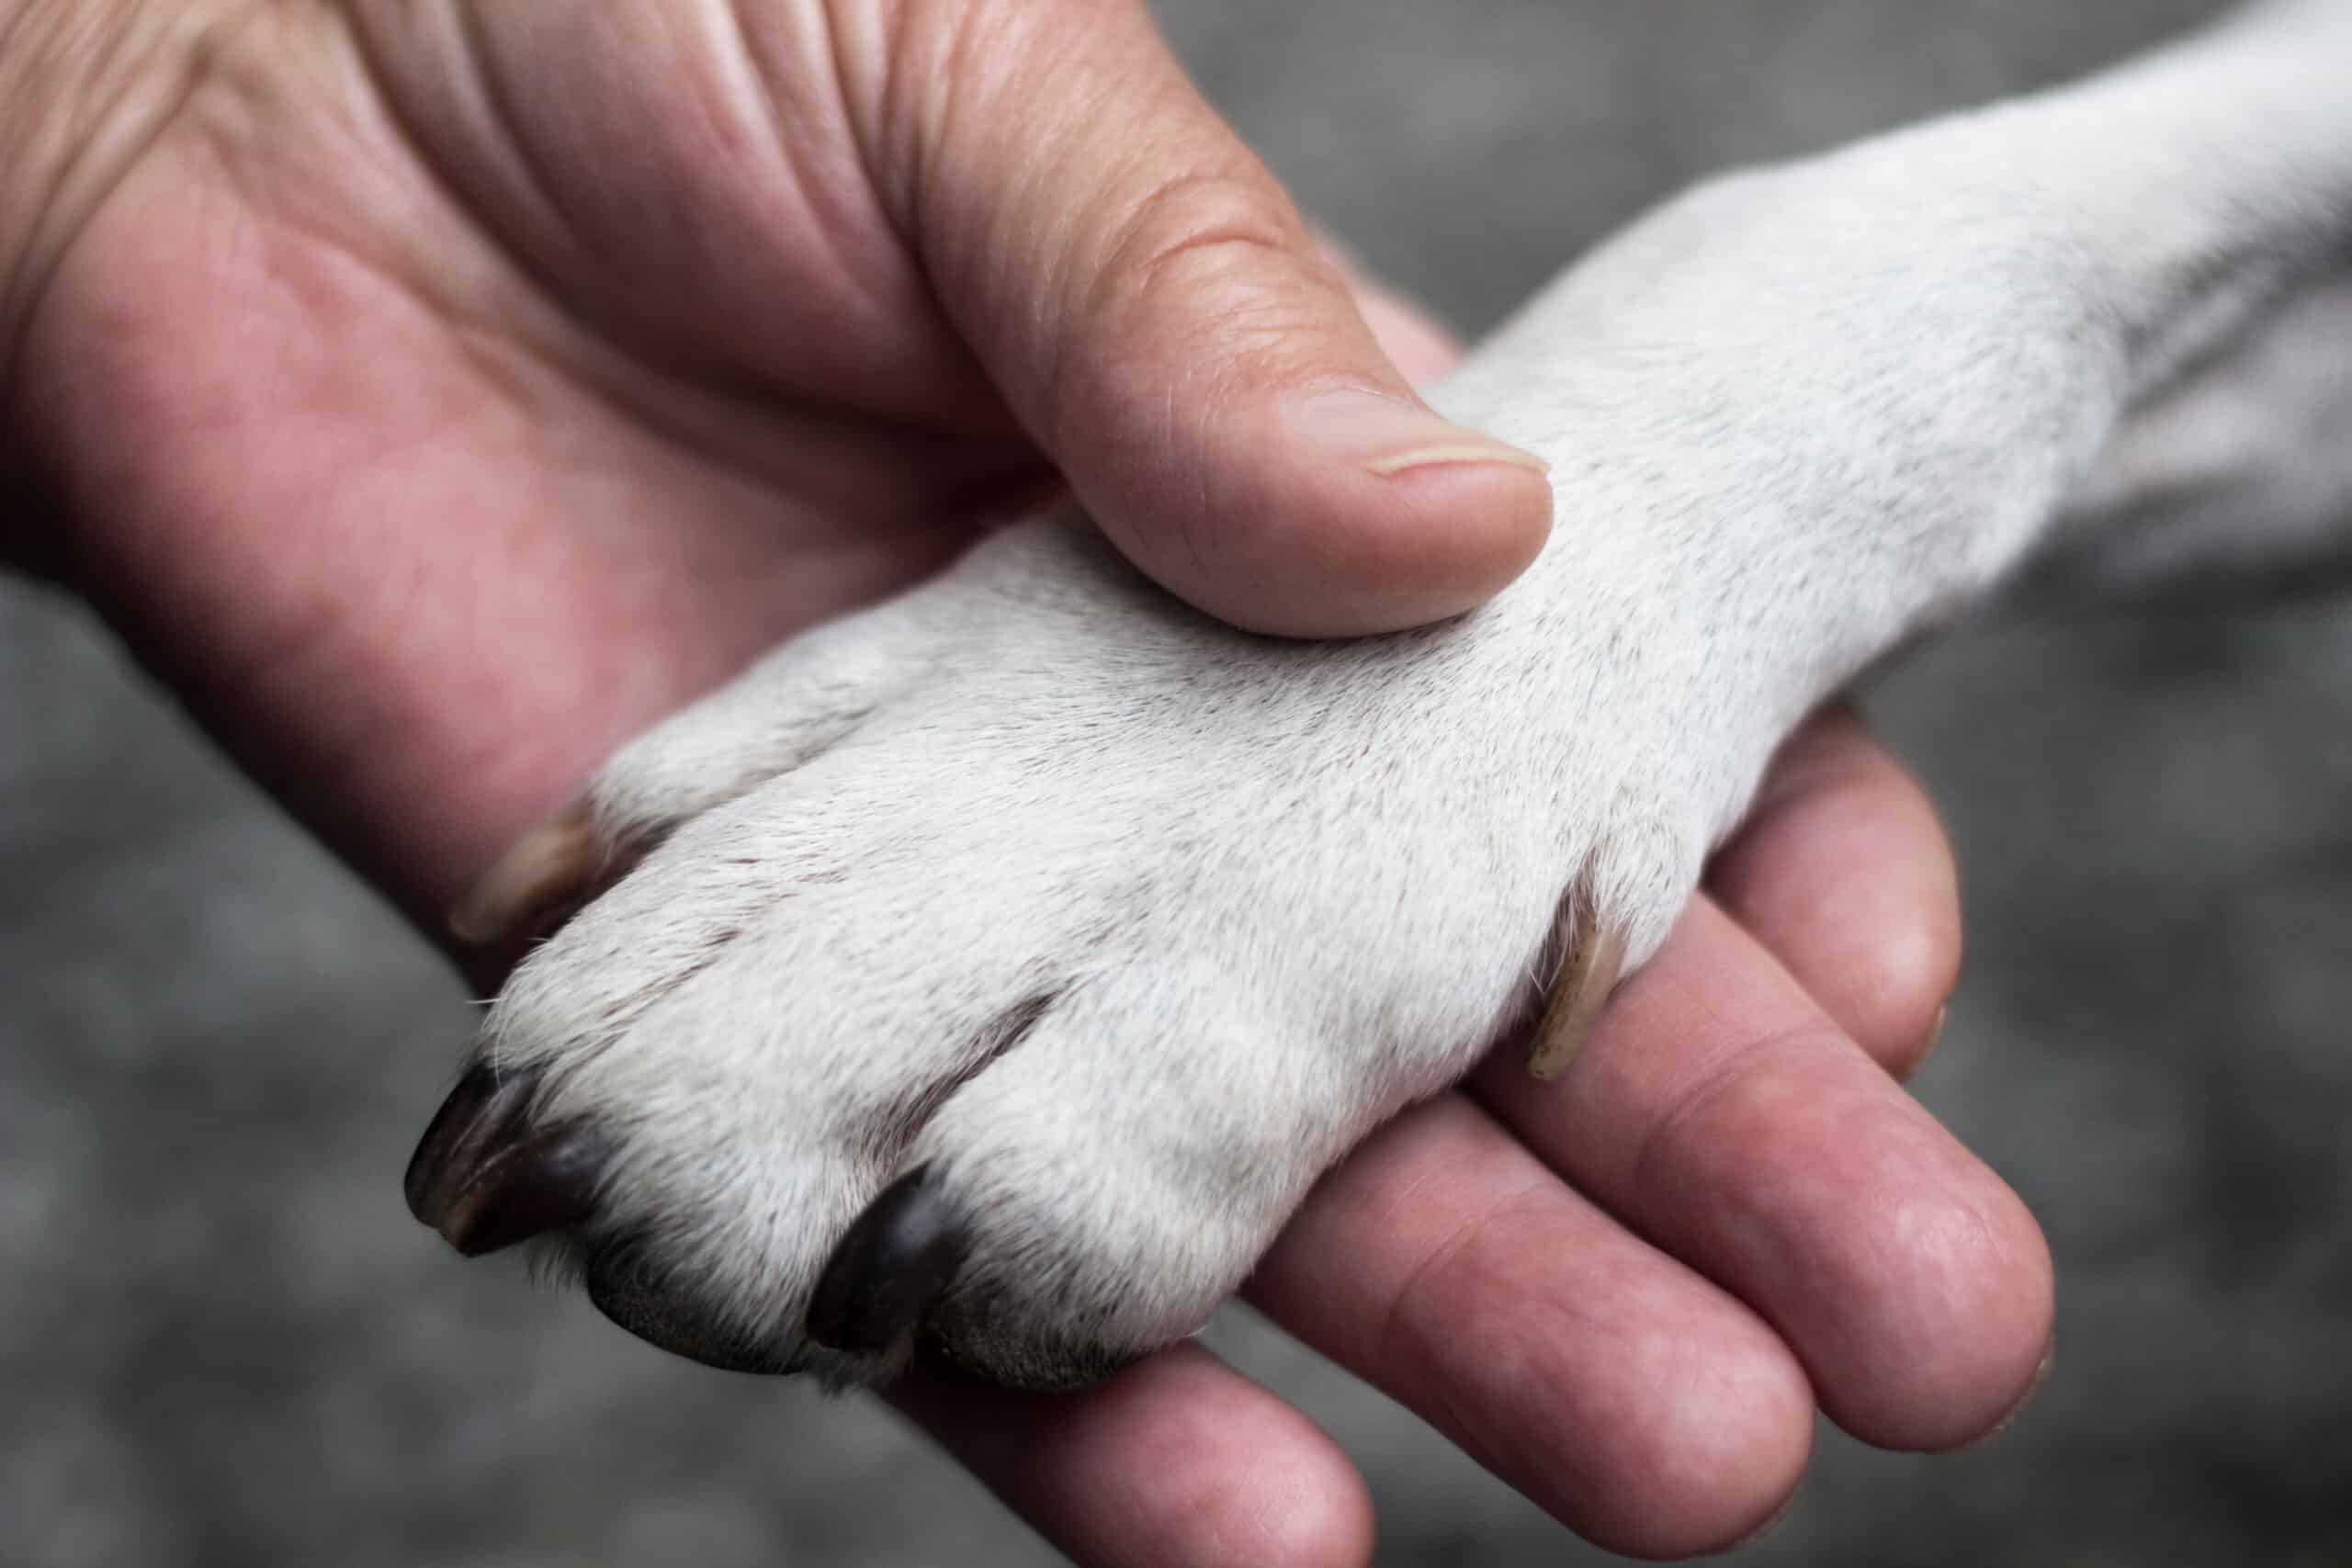 What You Should Know About Paw Pad Care